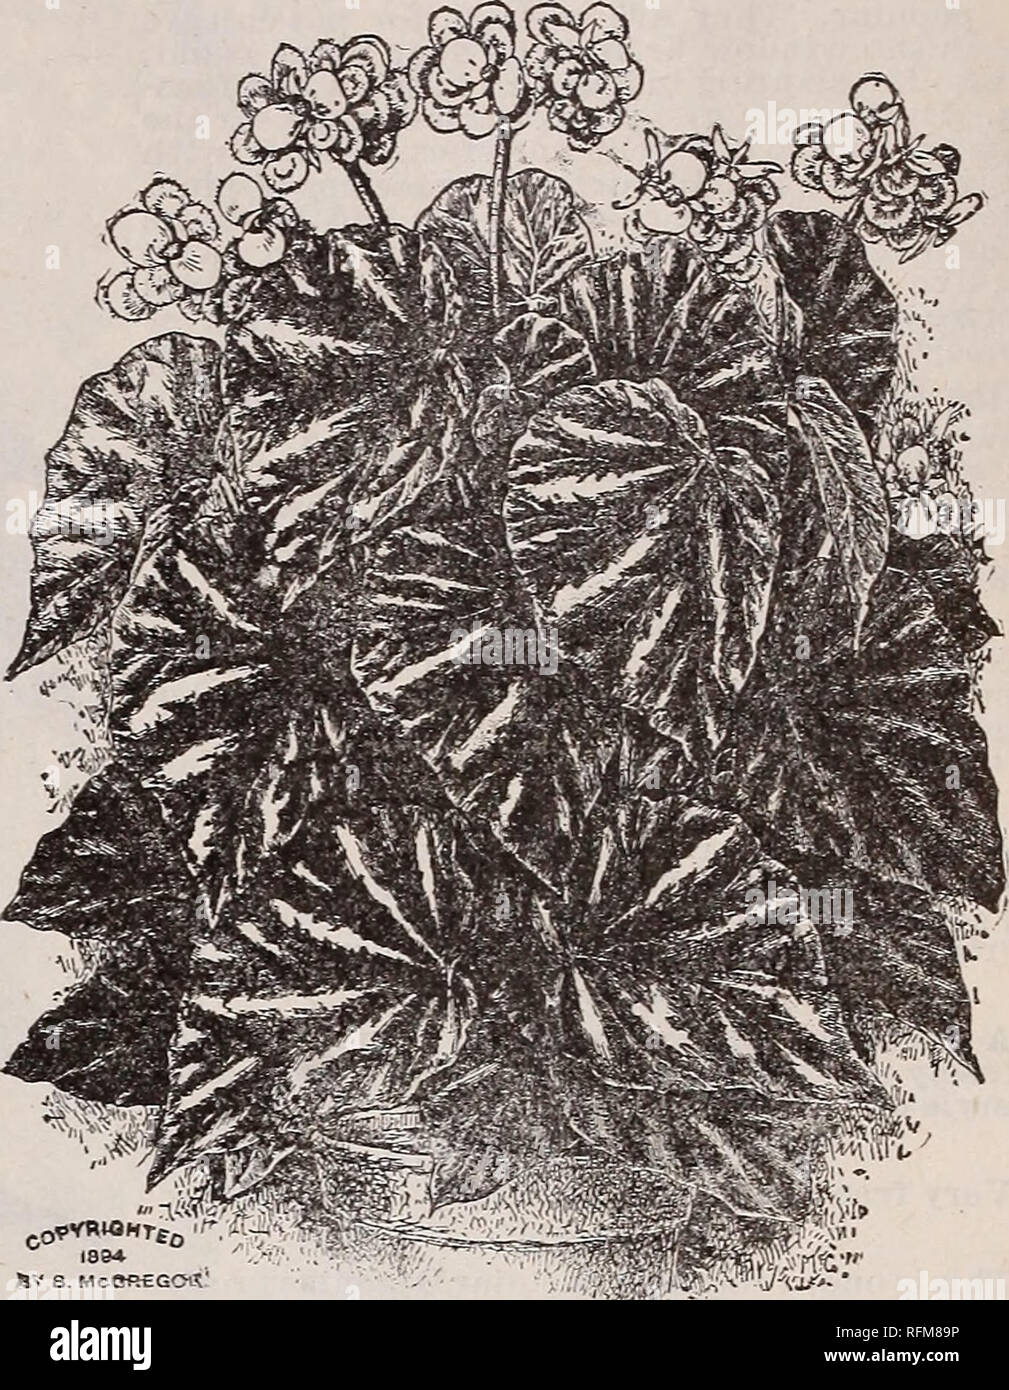 . The Geo. H. Mellen Co. : 1899. Nursery stock Ohio Catalogs; Bulbs (Plants) Catalogs; Flowers Seeds Catalogs; Plants, Ornamental Catalogs; Fruit Catalogs. Begonia Rubra. r *RUBRA. If you only have one Begonia, let it be a Rubra, for it * will prove a constant delight. It is so fast growing that â¦ * it will in a year or two reach the top of your window, â¦ t sending up heavy stiff canes an inch in diameter, and * â f rising beside them will grow strong, slender branches, I * gracefully drooping under heavy waxen leaves and t 1 pendant panicles of coral-colored flowers as large as a â¦ * hand. Stock Photo